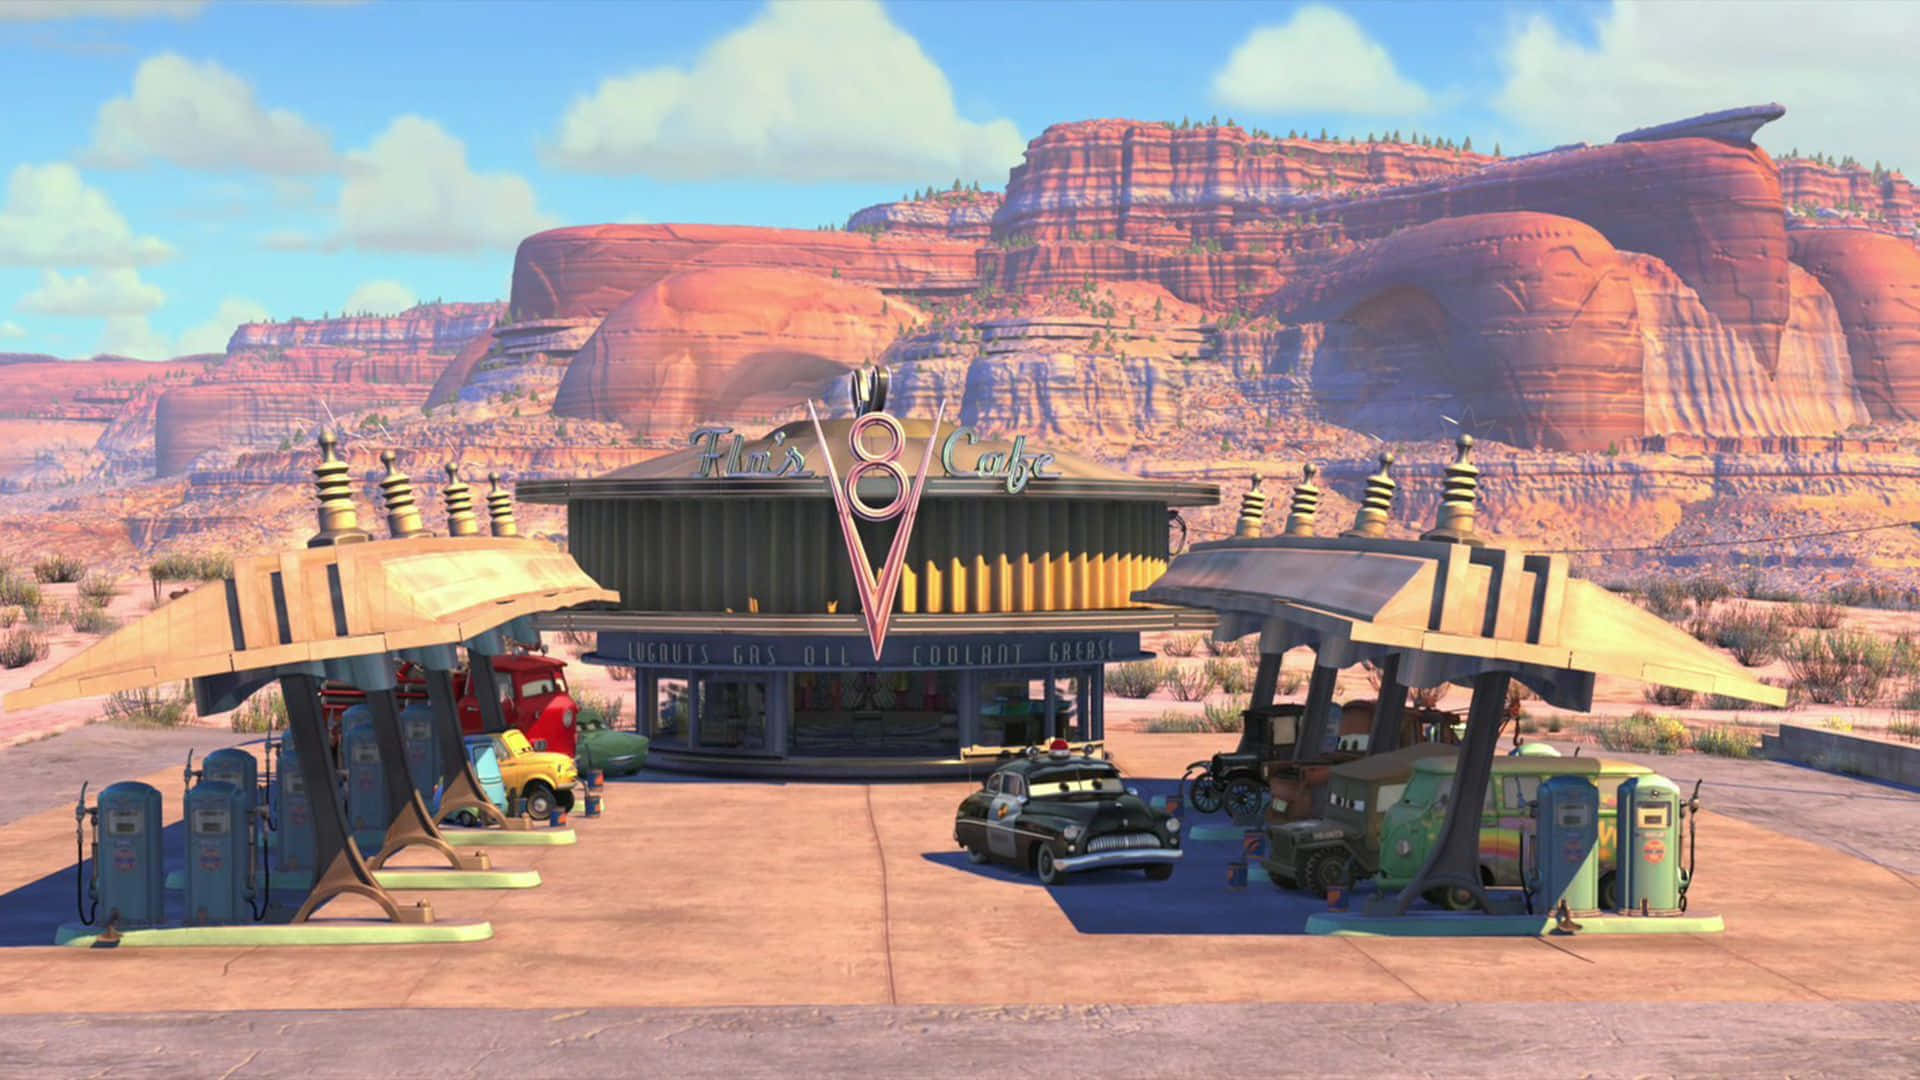 Welcome to Radiator Springs, the gateway of Route 66. Wallpaper